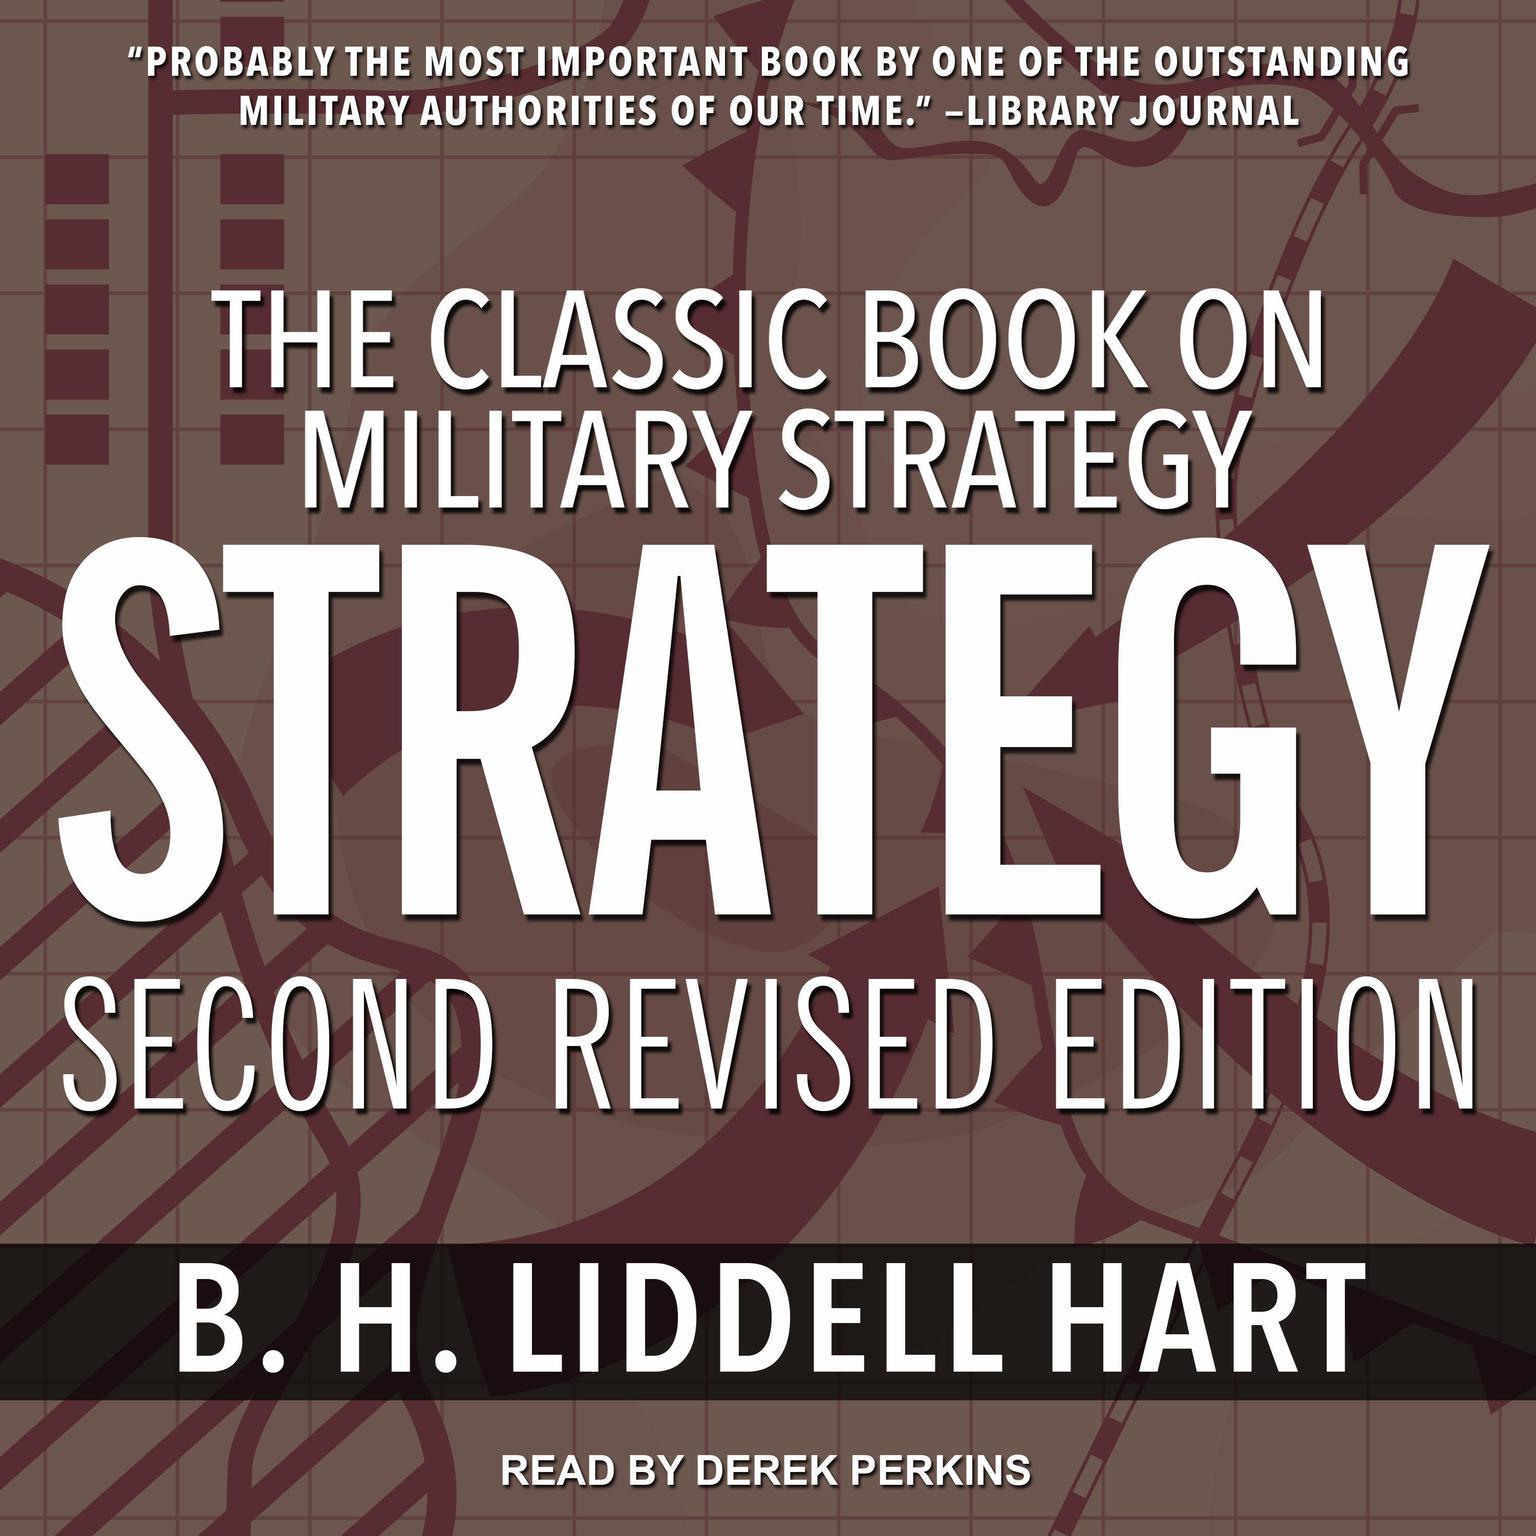 Strategy: The Indirect Approach Audiobook, by B.H. Liddell Hart